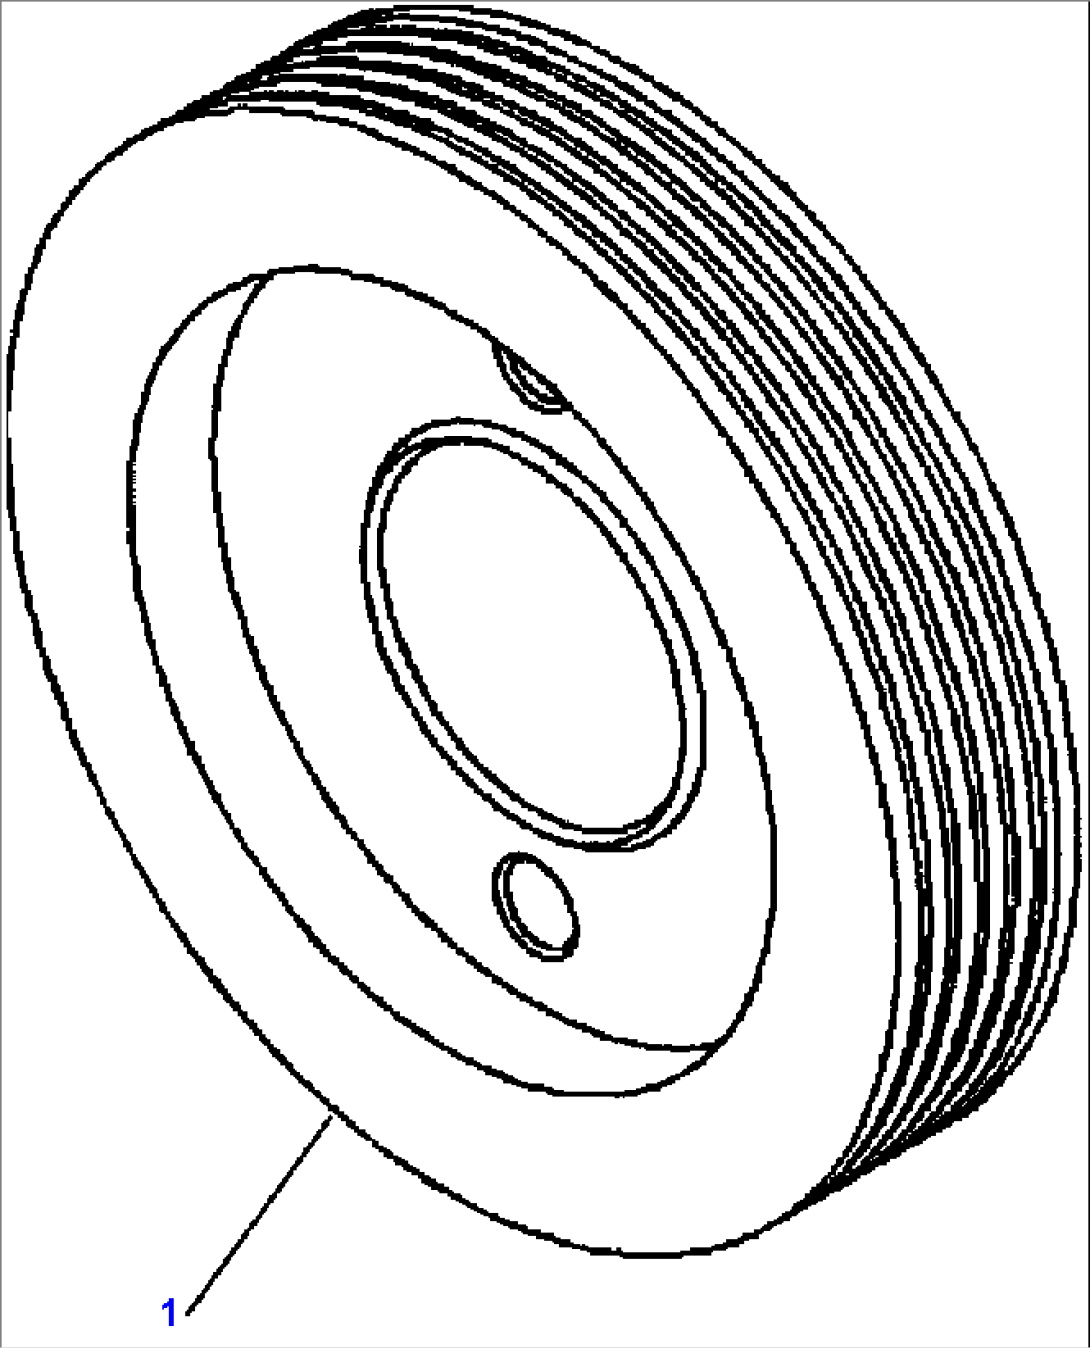 ALTERNATOR PULLEY (PULLEY LOCATED RIGHT SIDE OF ENGINE)